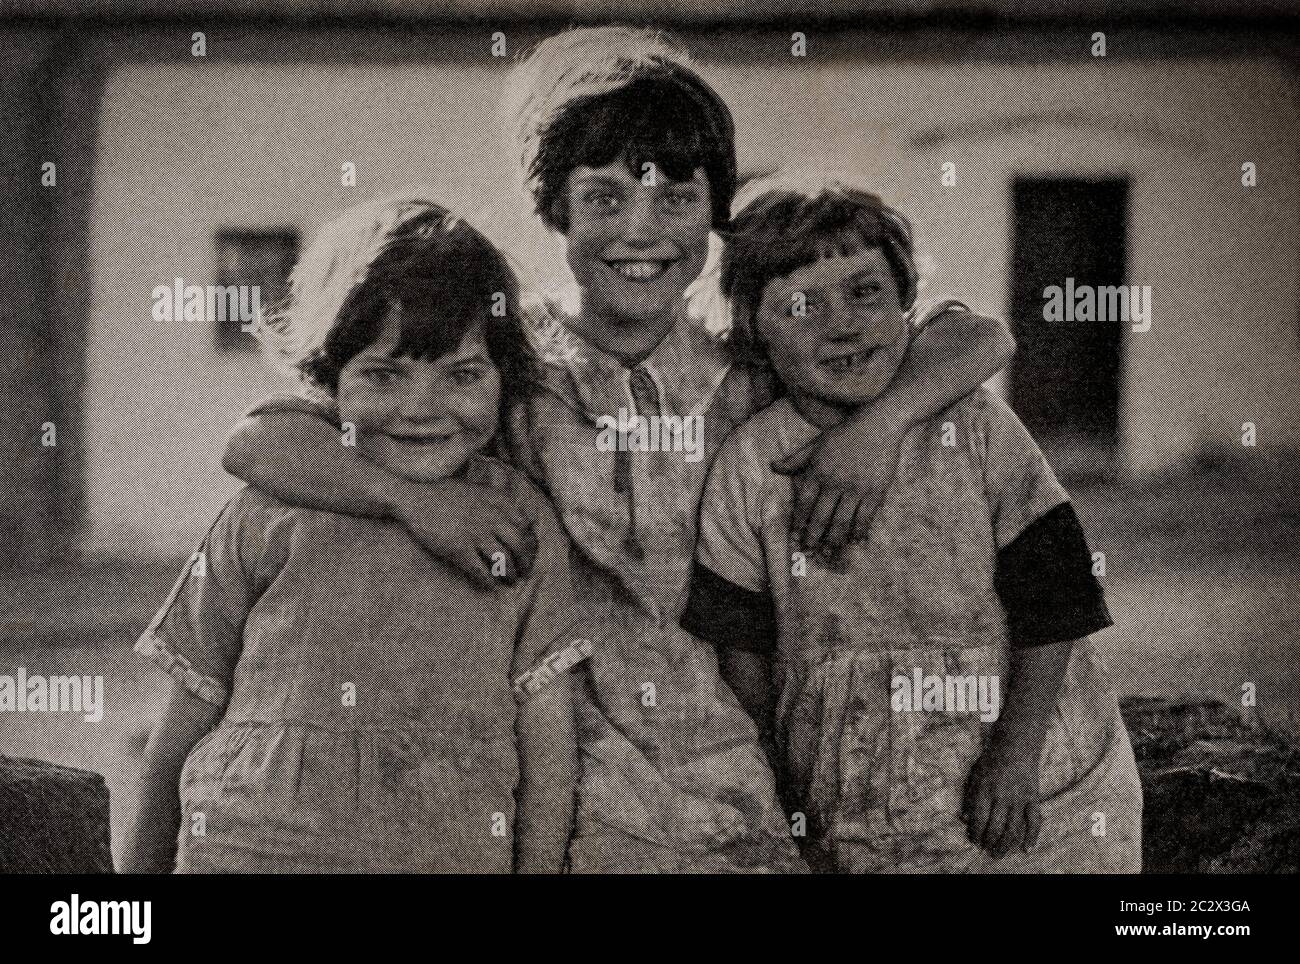 An early 1920's view of three young girls, from Drogheda on the Louth/Meath border. Originally photographed by Clifton Adams (1890-1934) for 'Ireland: The Rock Whence I Was Hewn', a National Geographic Magazine feature from March 1927. Stock Photo